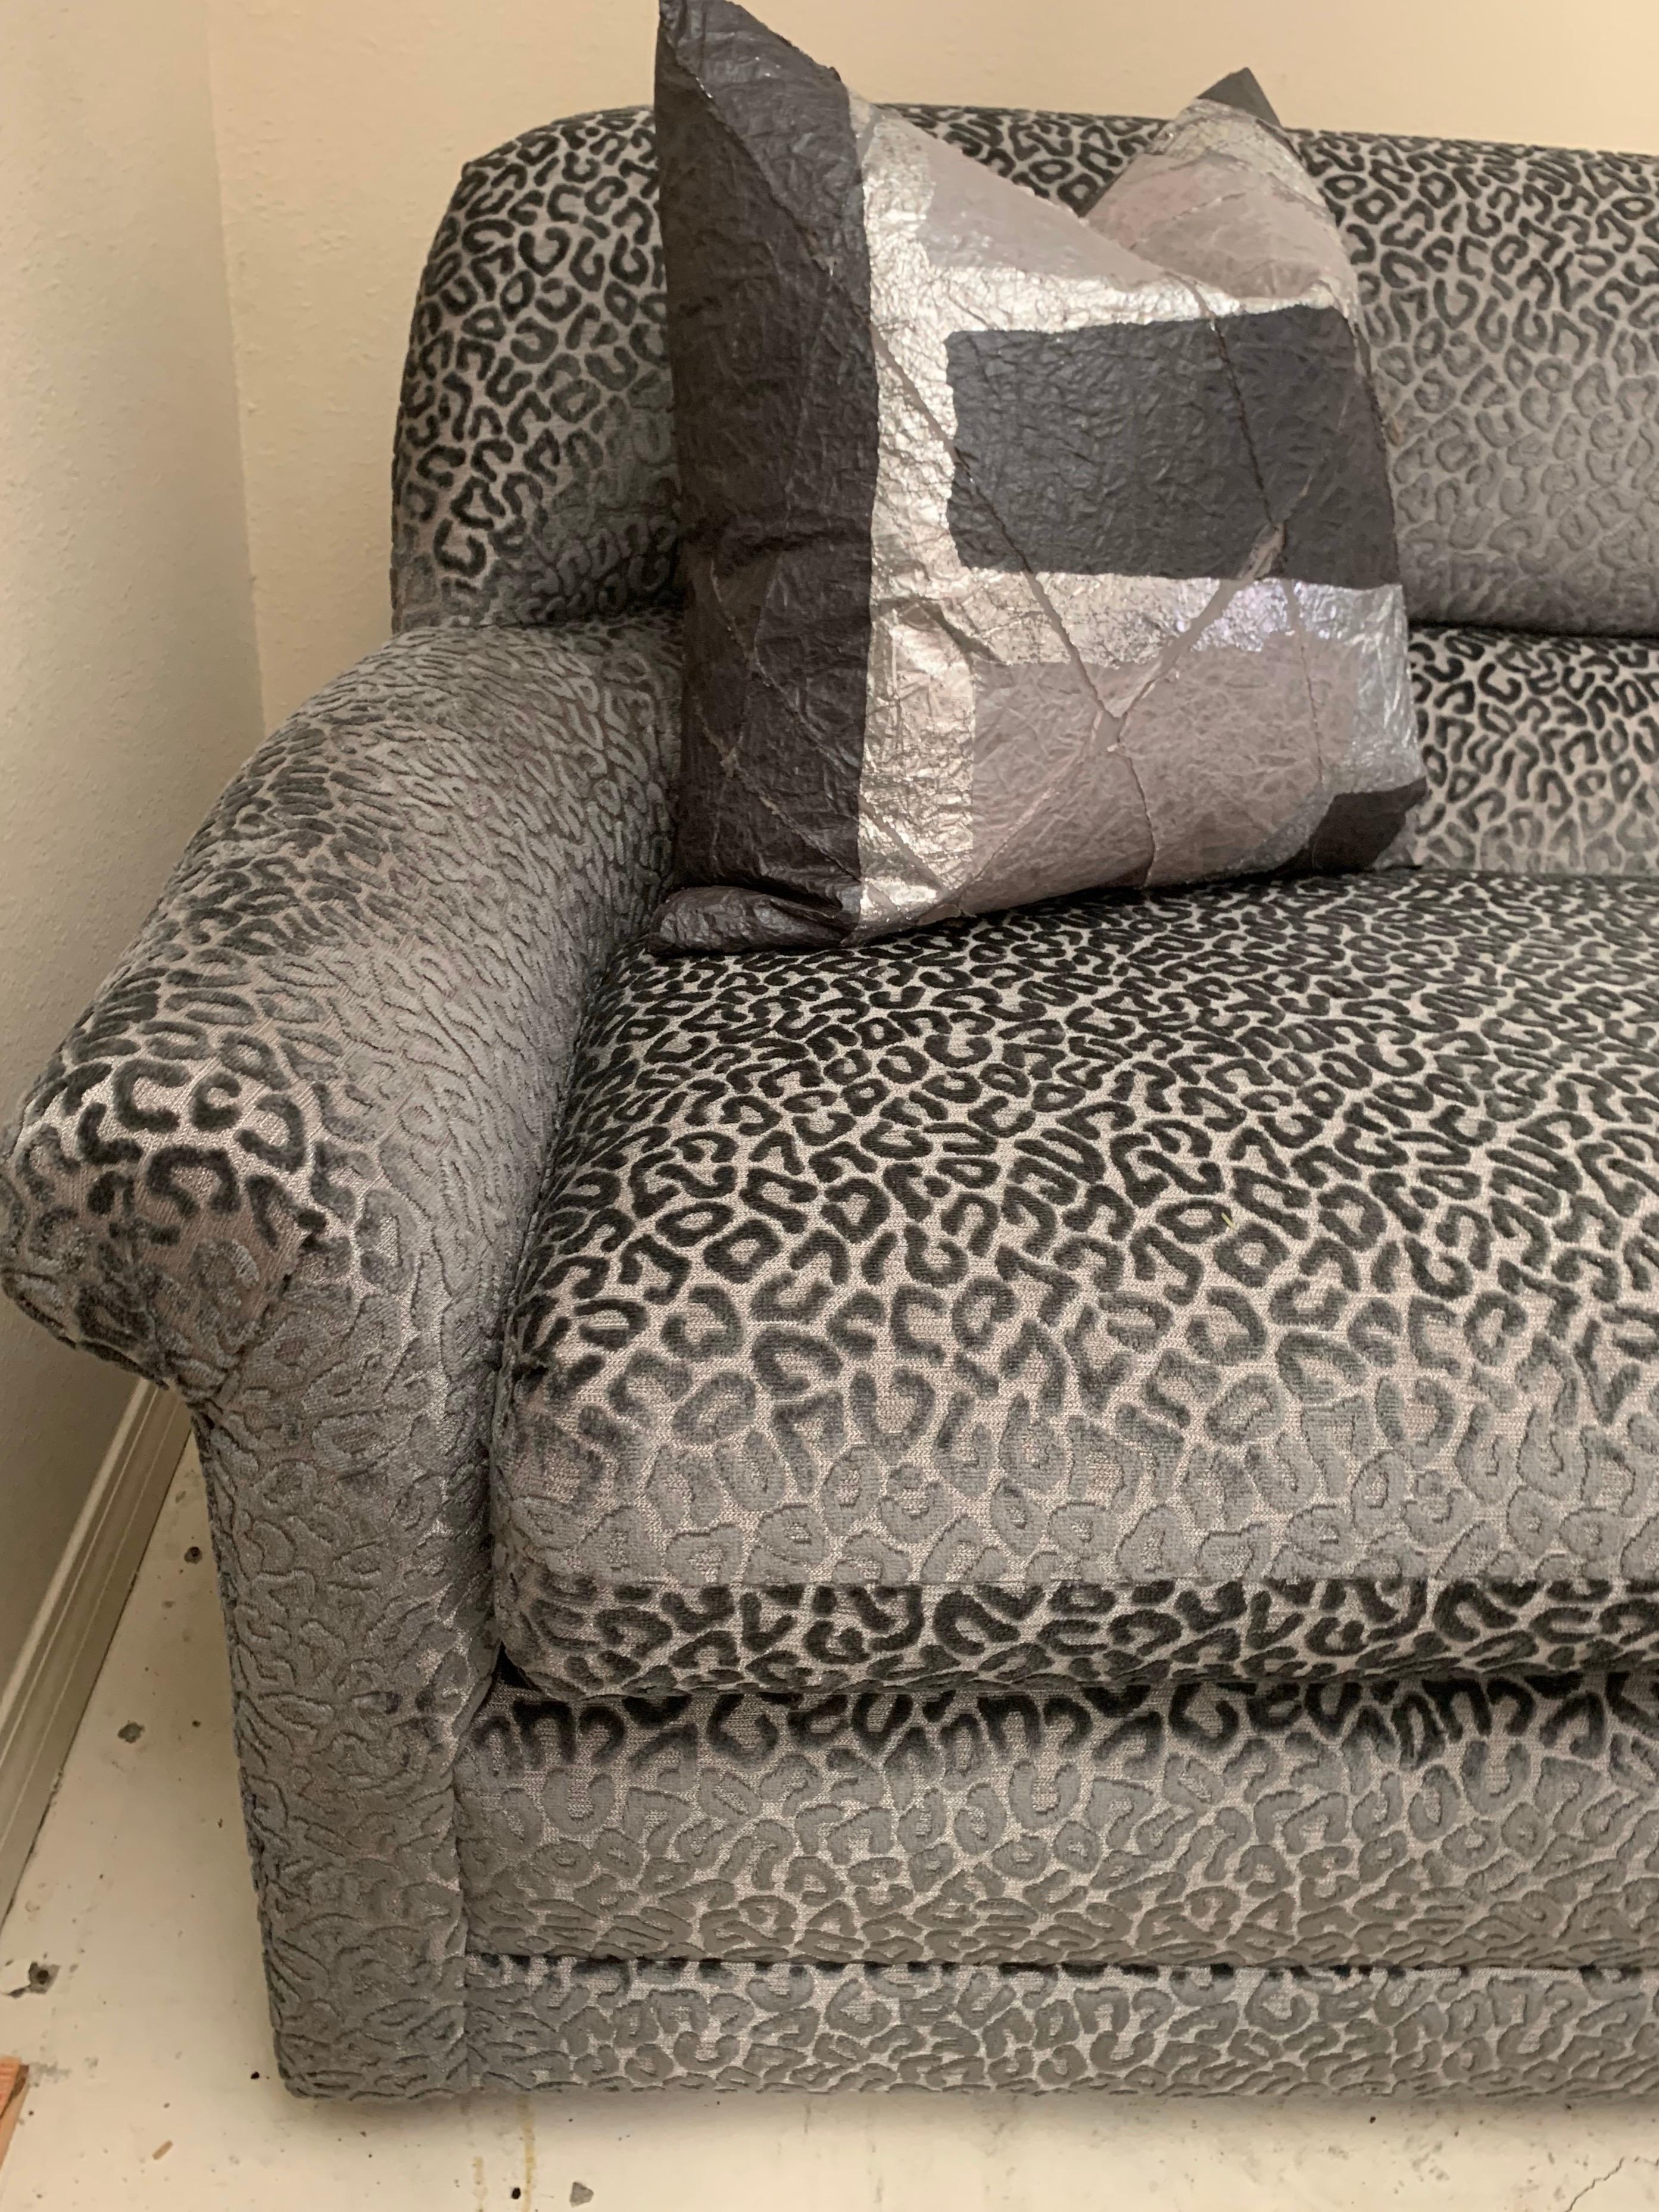 We took an amazing 1980s sofa by Directional and found a spectacular metallic silver gray leopard velvet fabric to redo it in. The result is a spectacular modern piece of furniture. Sculptural with ruched sides. Loose reversible cushions. Fabric